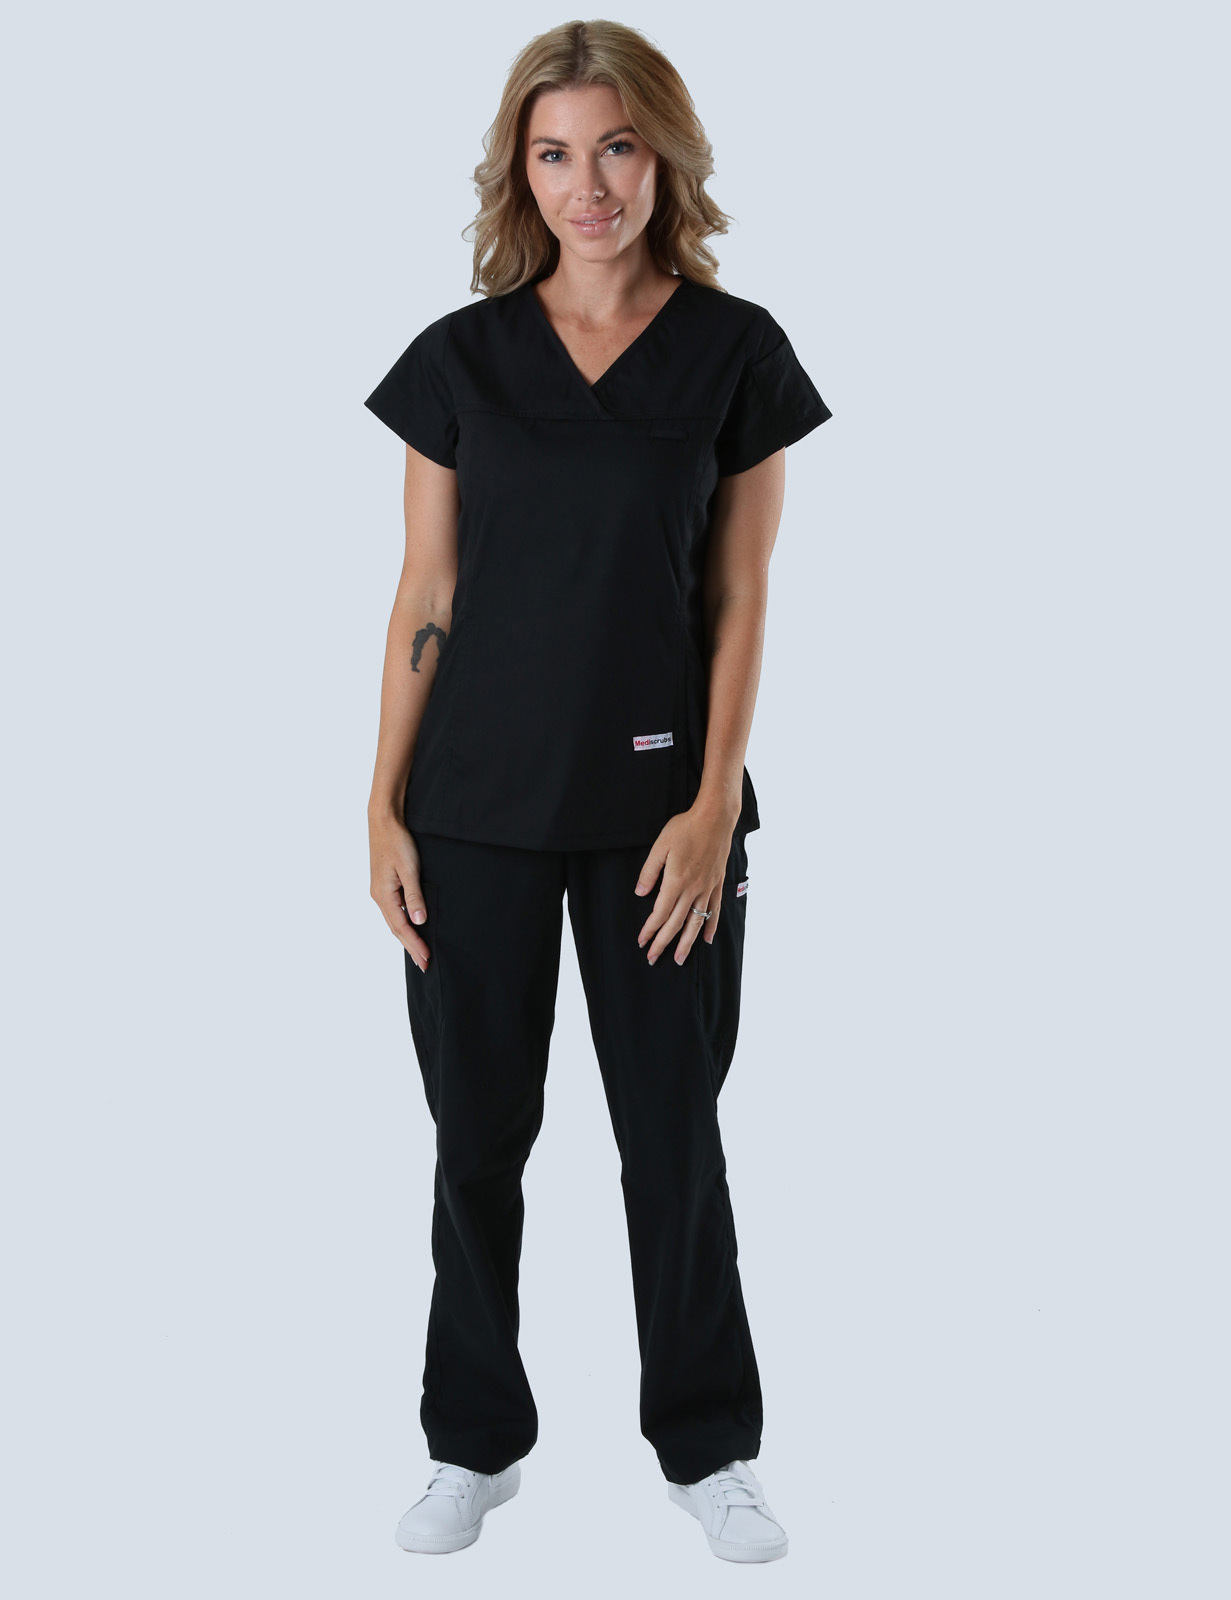 Women's Fit Solid Scrub Top - Black - X Large